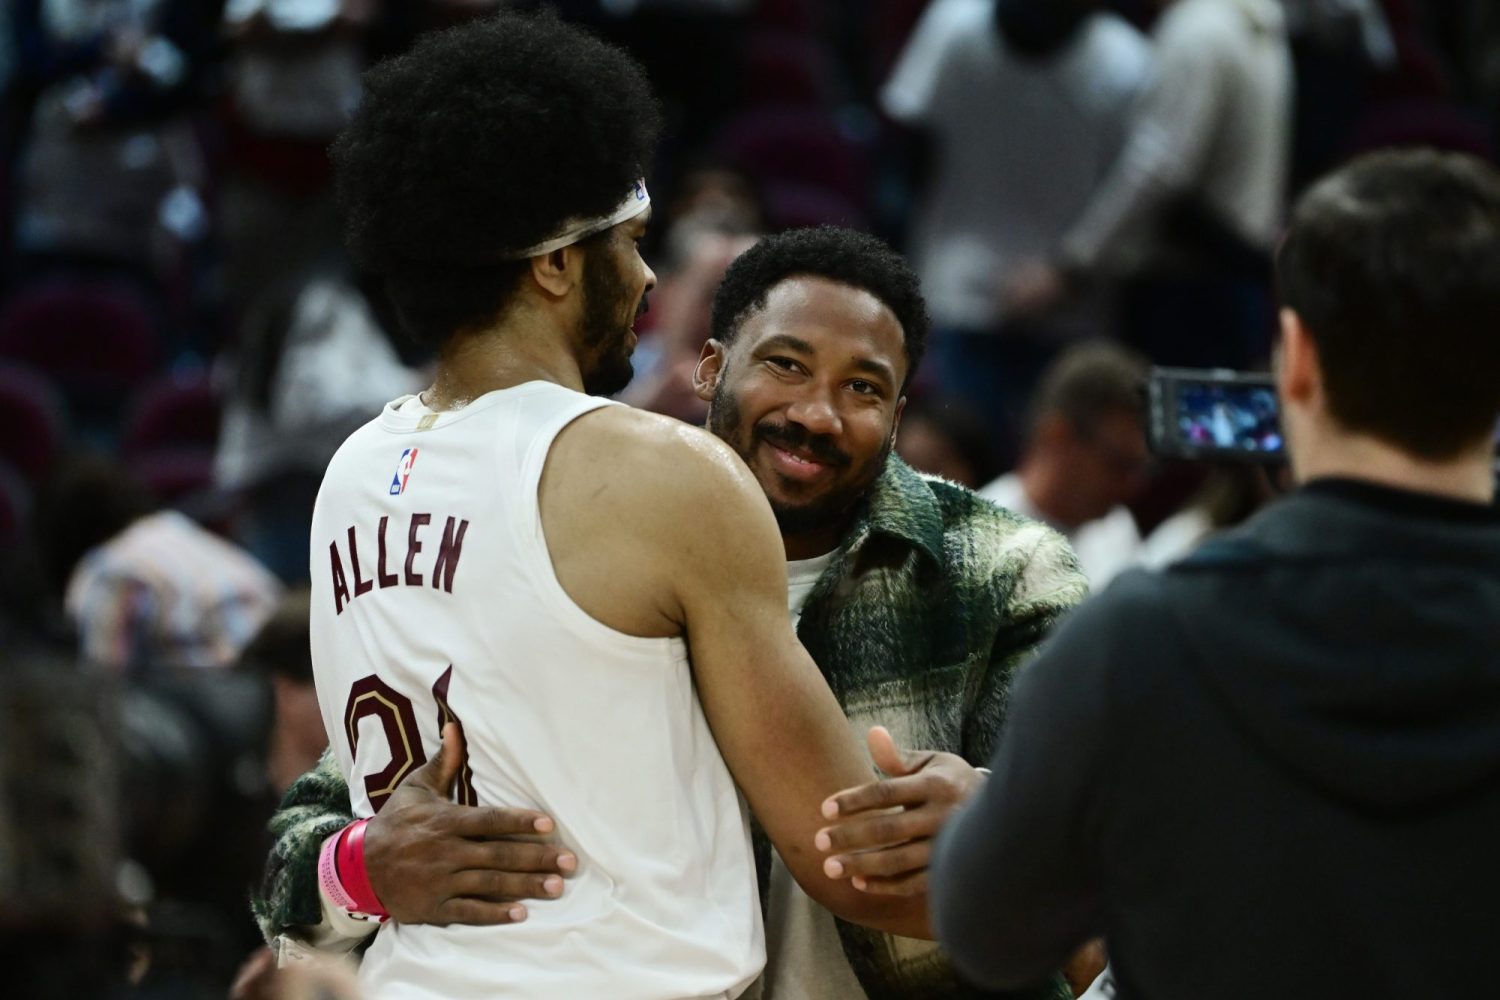 Cleveland Cavaliers center Jarrett Allen hugs Cleveland Browns player Myles Garrett after the Cavaliers beat the New York Knicks in game two of the 2023 NBA playoffs at Rocket Mortgage FieldHouse.